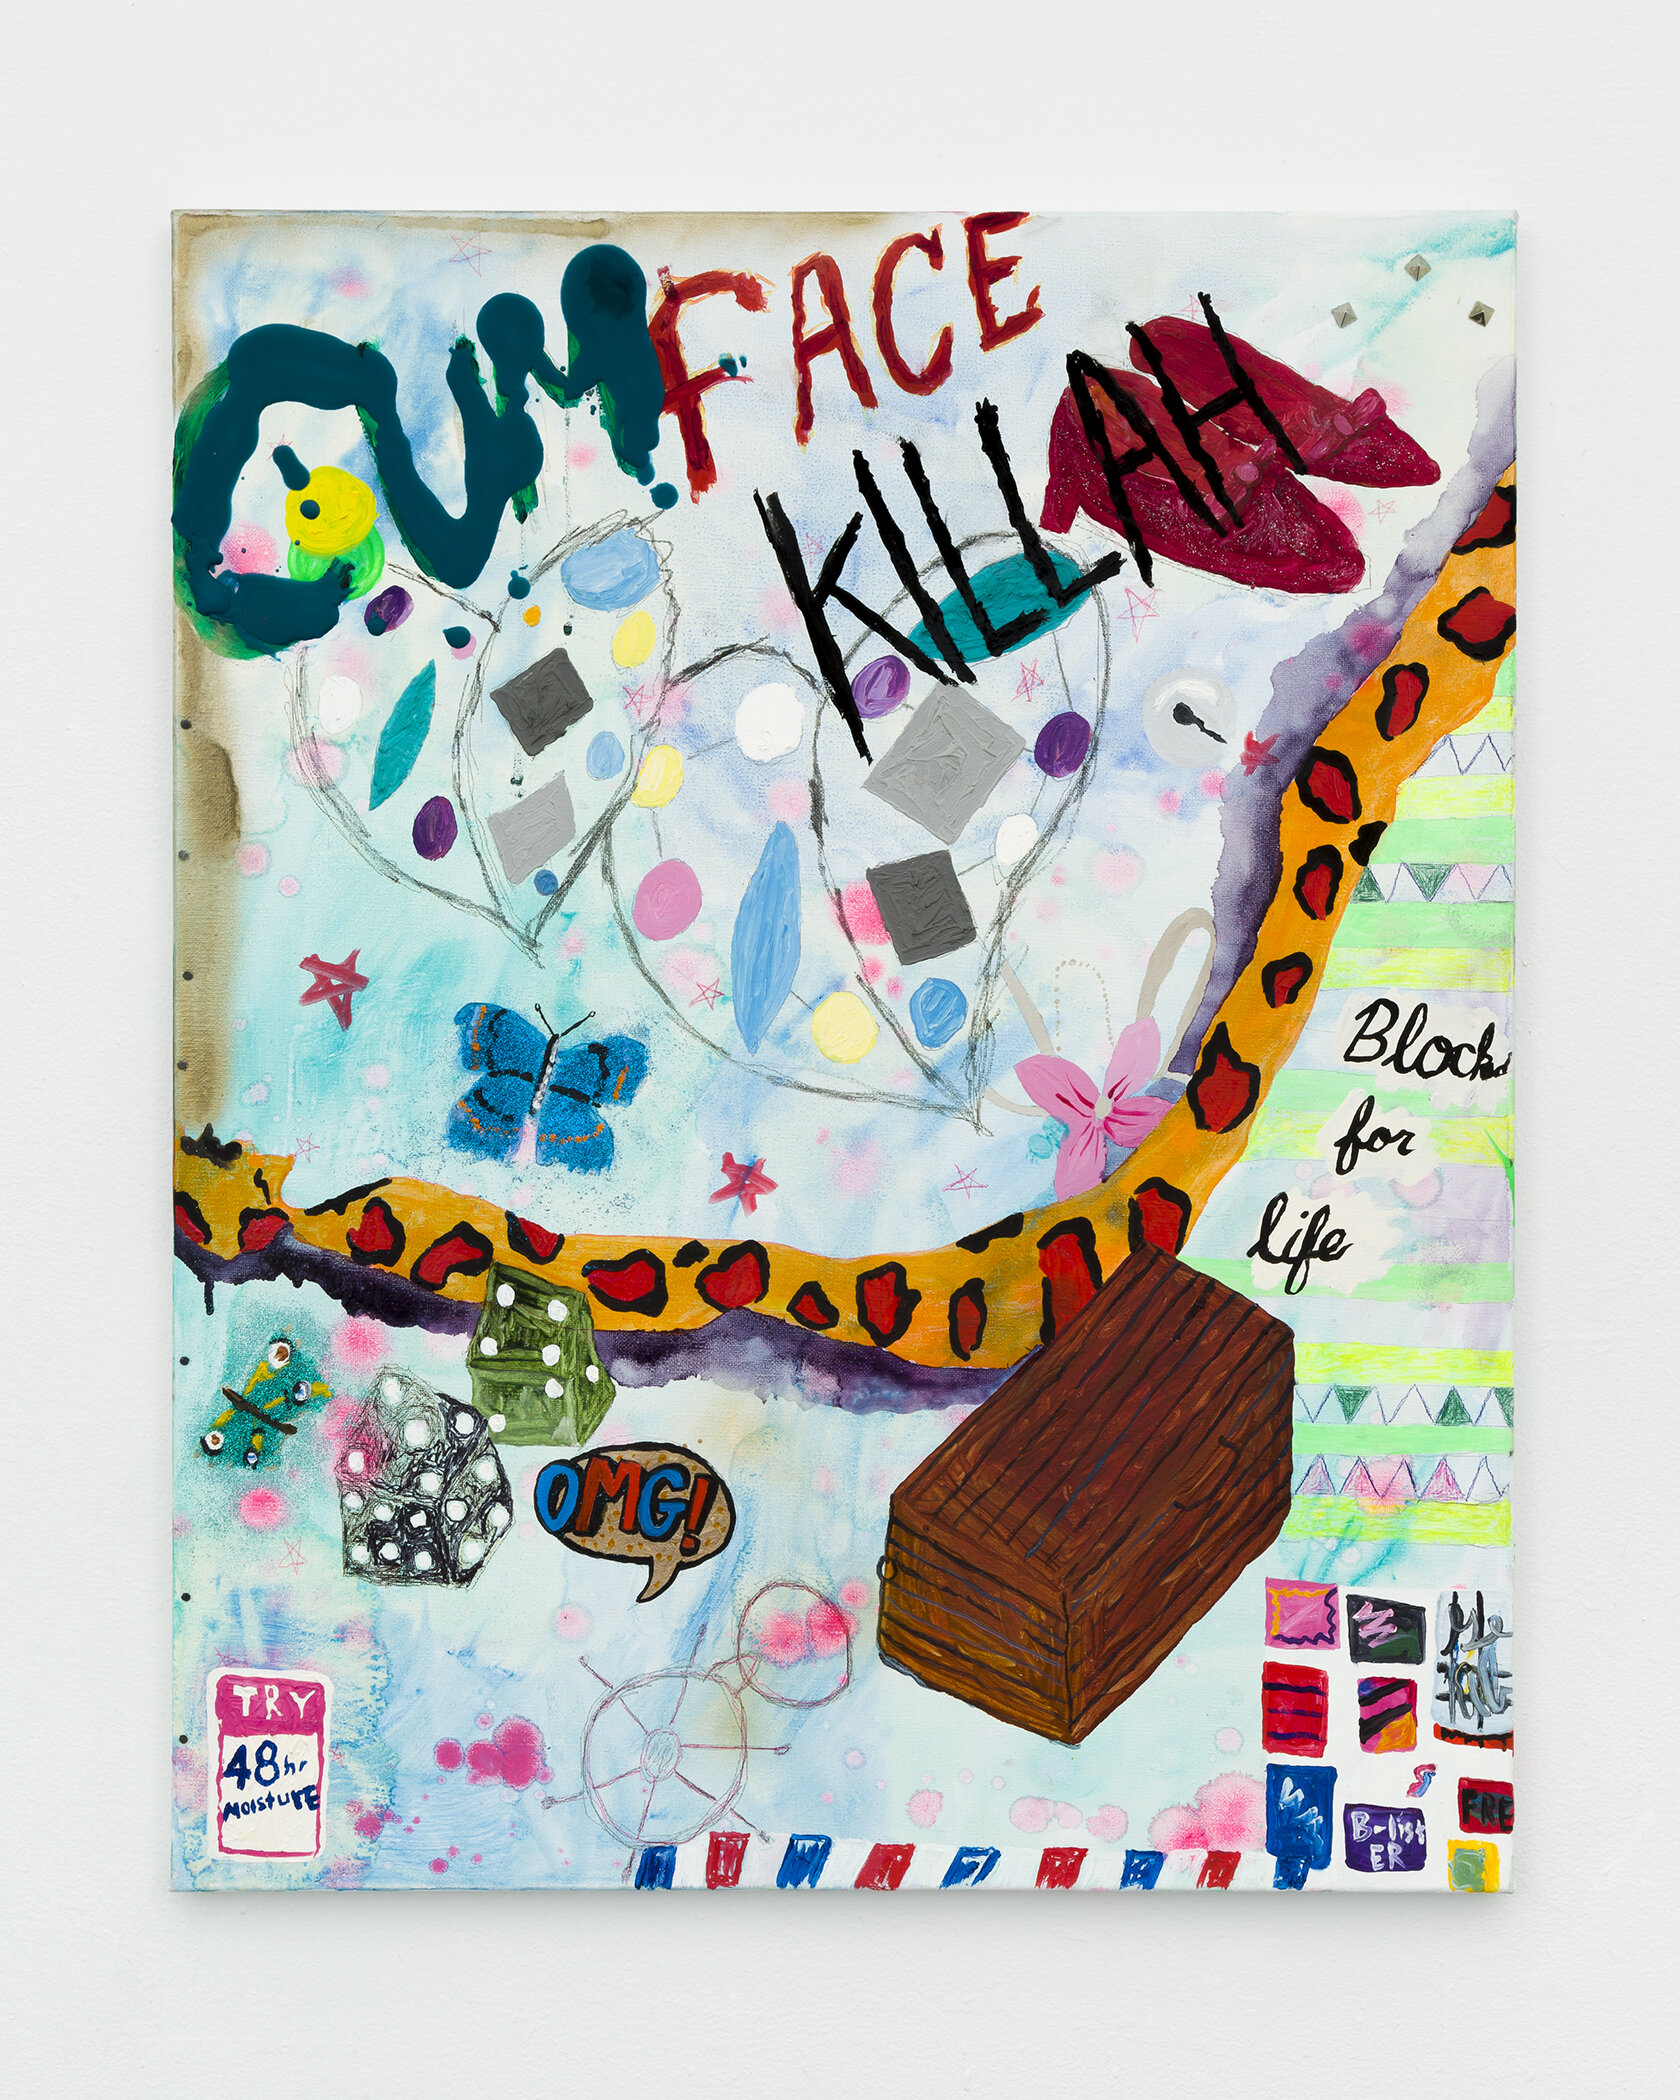  Alicia Gibson,  Cumface Killah,  2020, Oil and encaustic on linen,  30 × 24 inches  